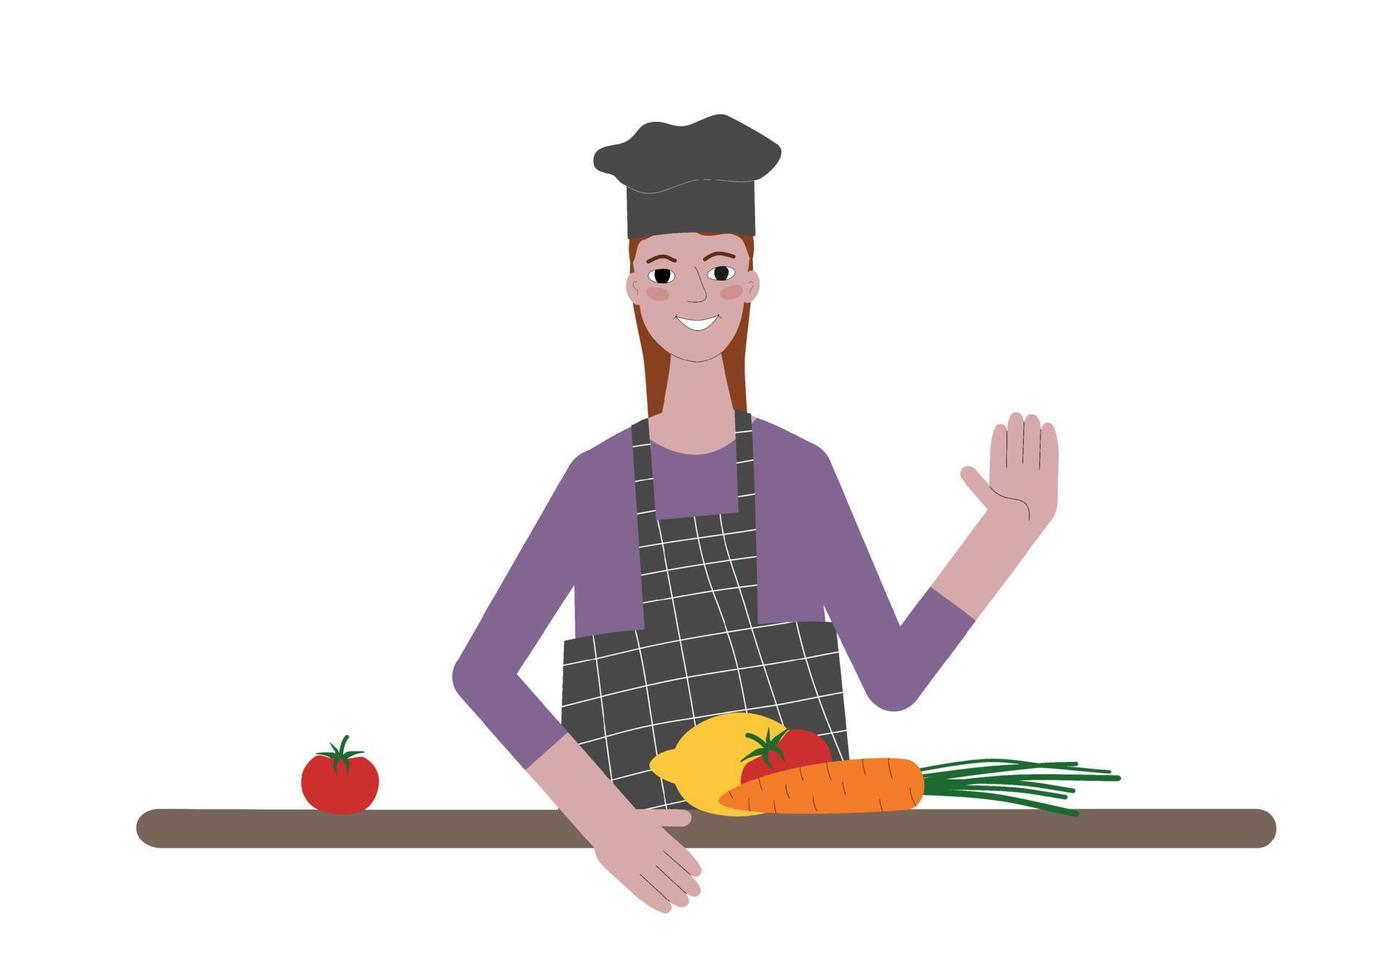 Female chef cook in a uniform stands at the table with vegetables, smiles and waives her hand. Cartoon flat style, vector illustration. Culinary concept.